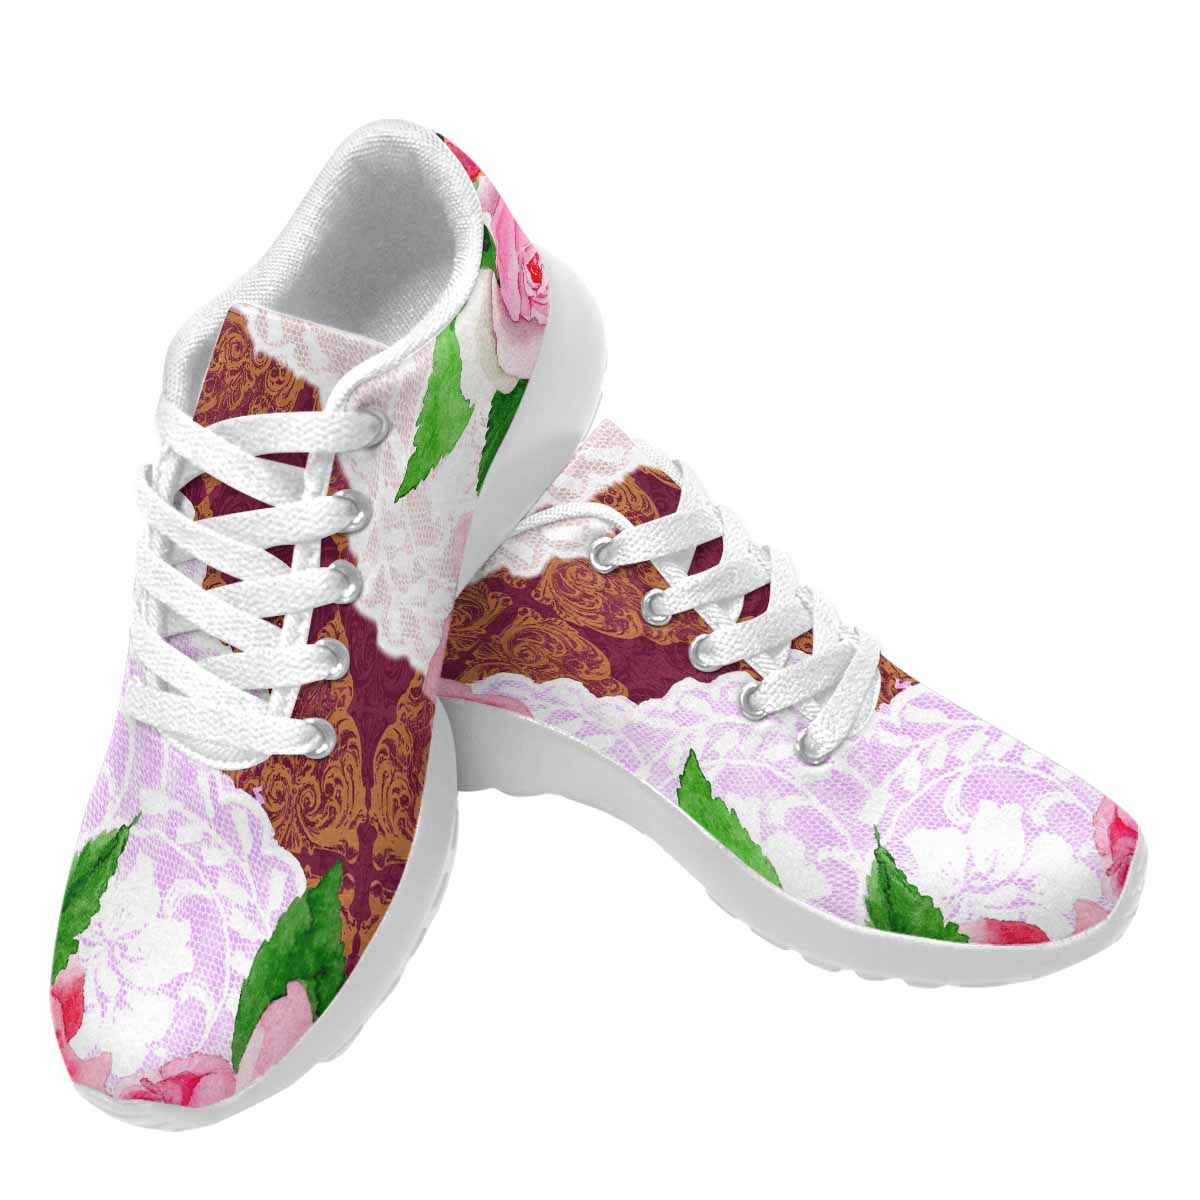 Victorian lace print, womens cute casual or running sneakers, design 19